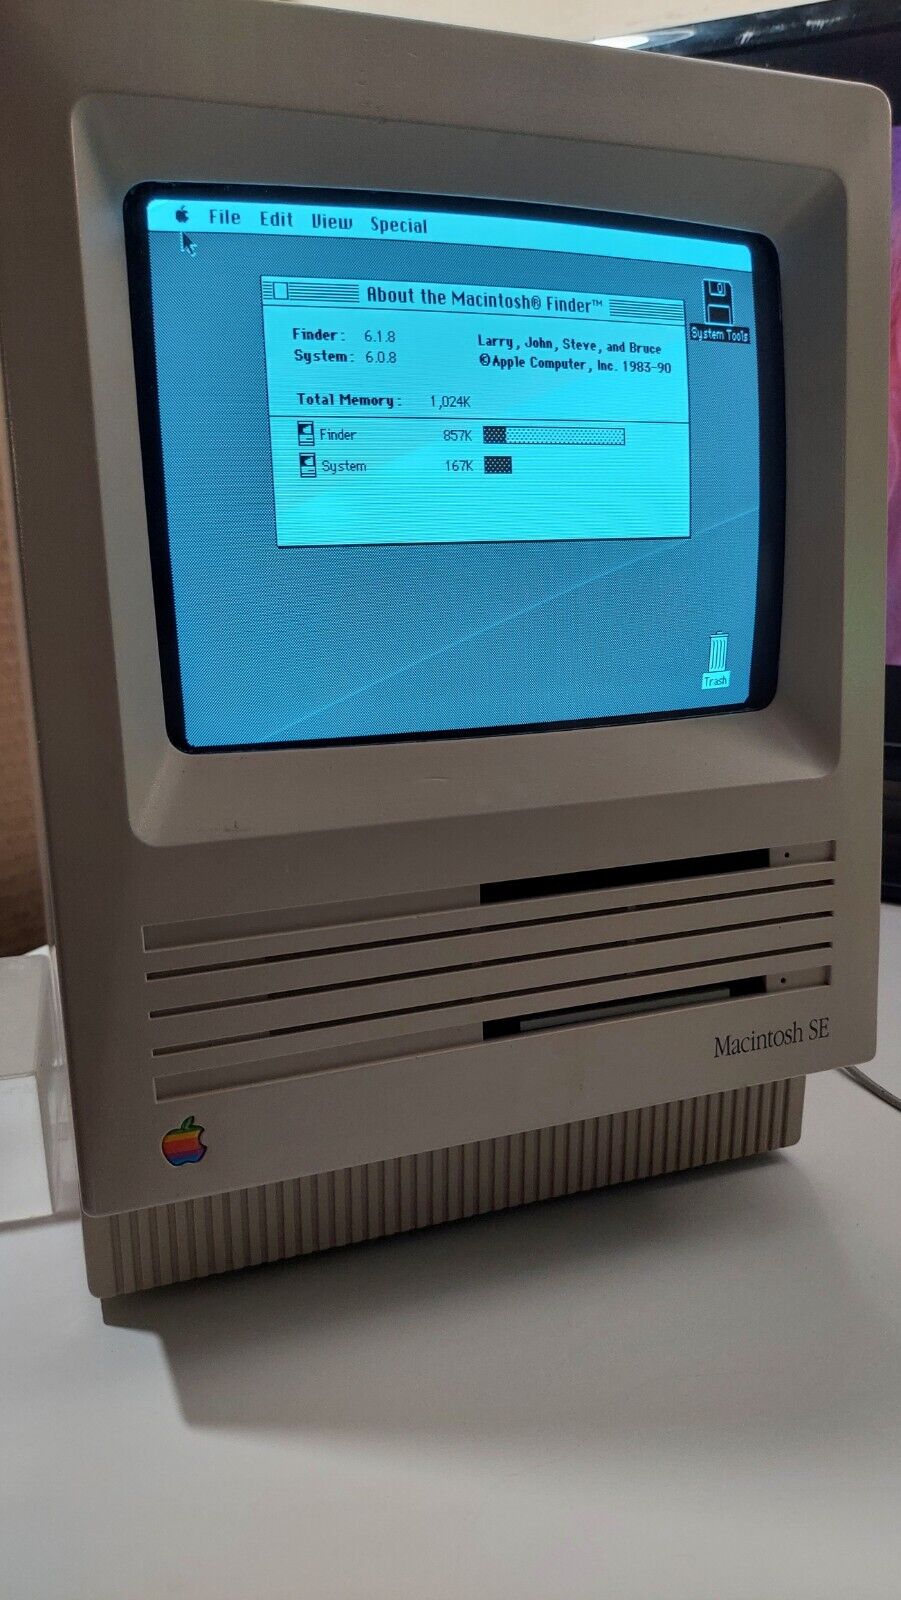 Apple Macintosh SE M5010 Vintage Computer - cleaned and tested